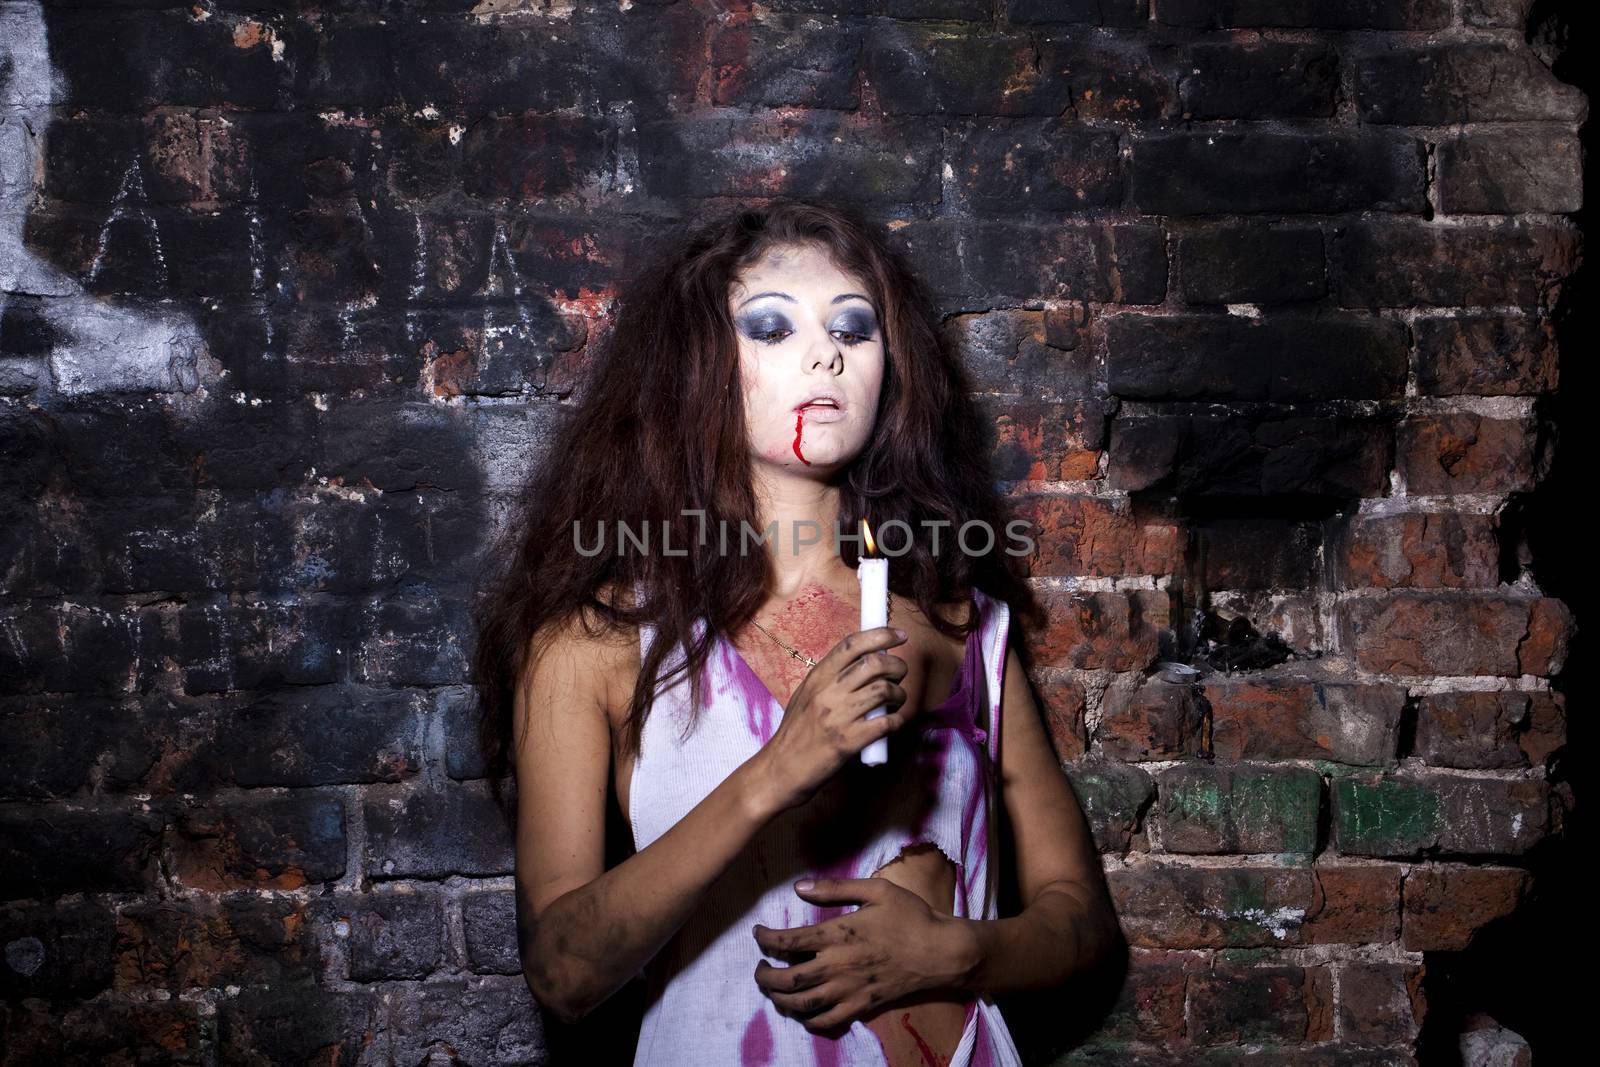 Frightened girl with a candle in hands